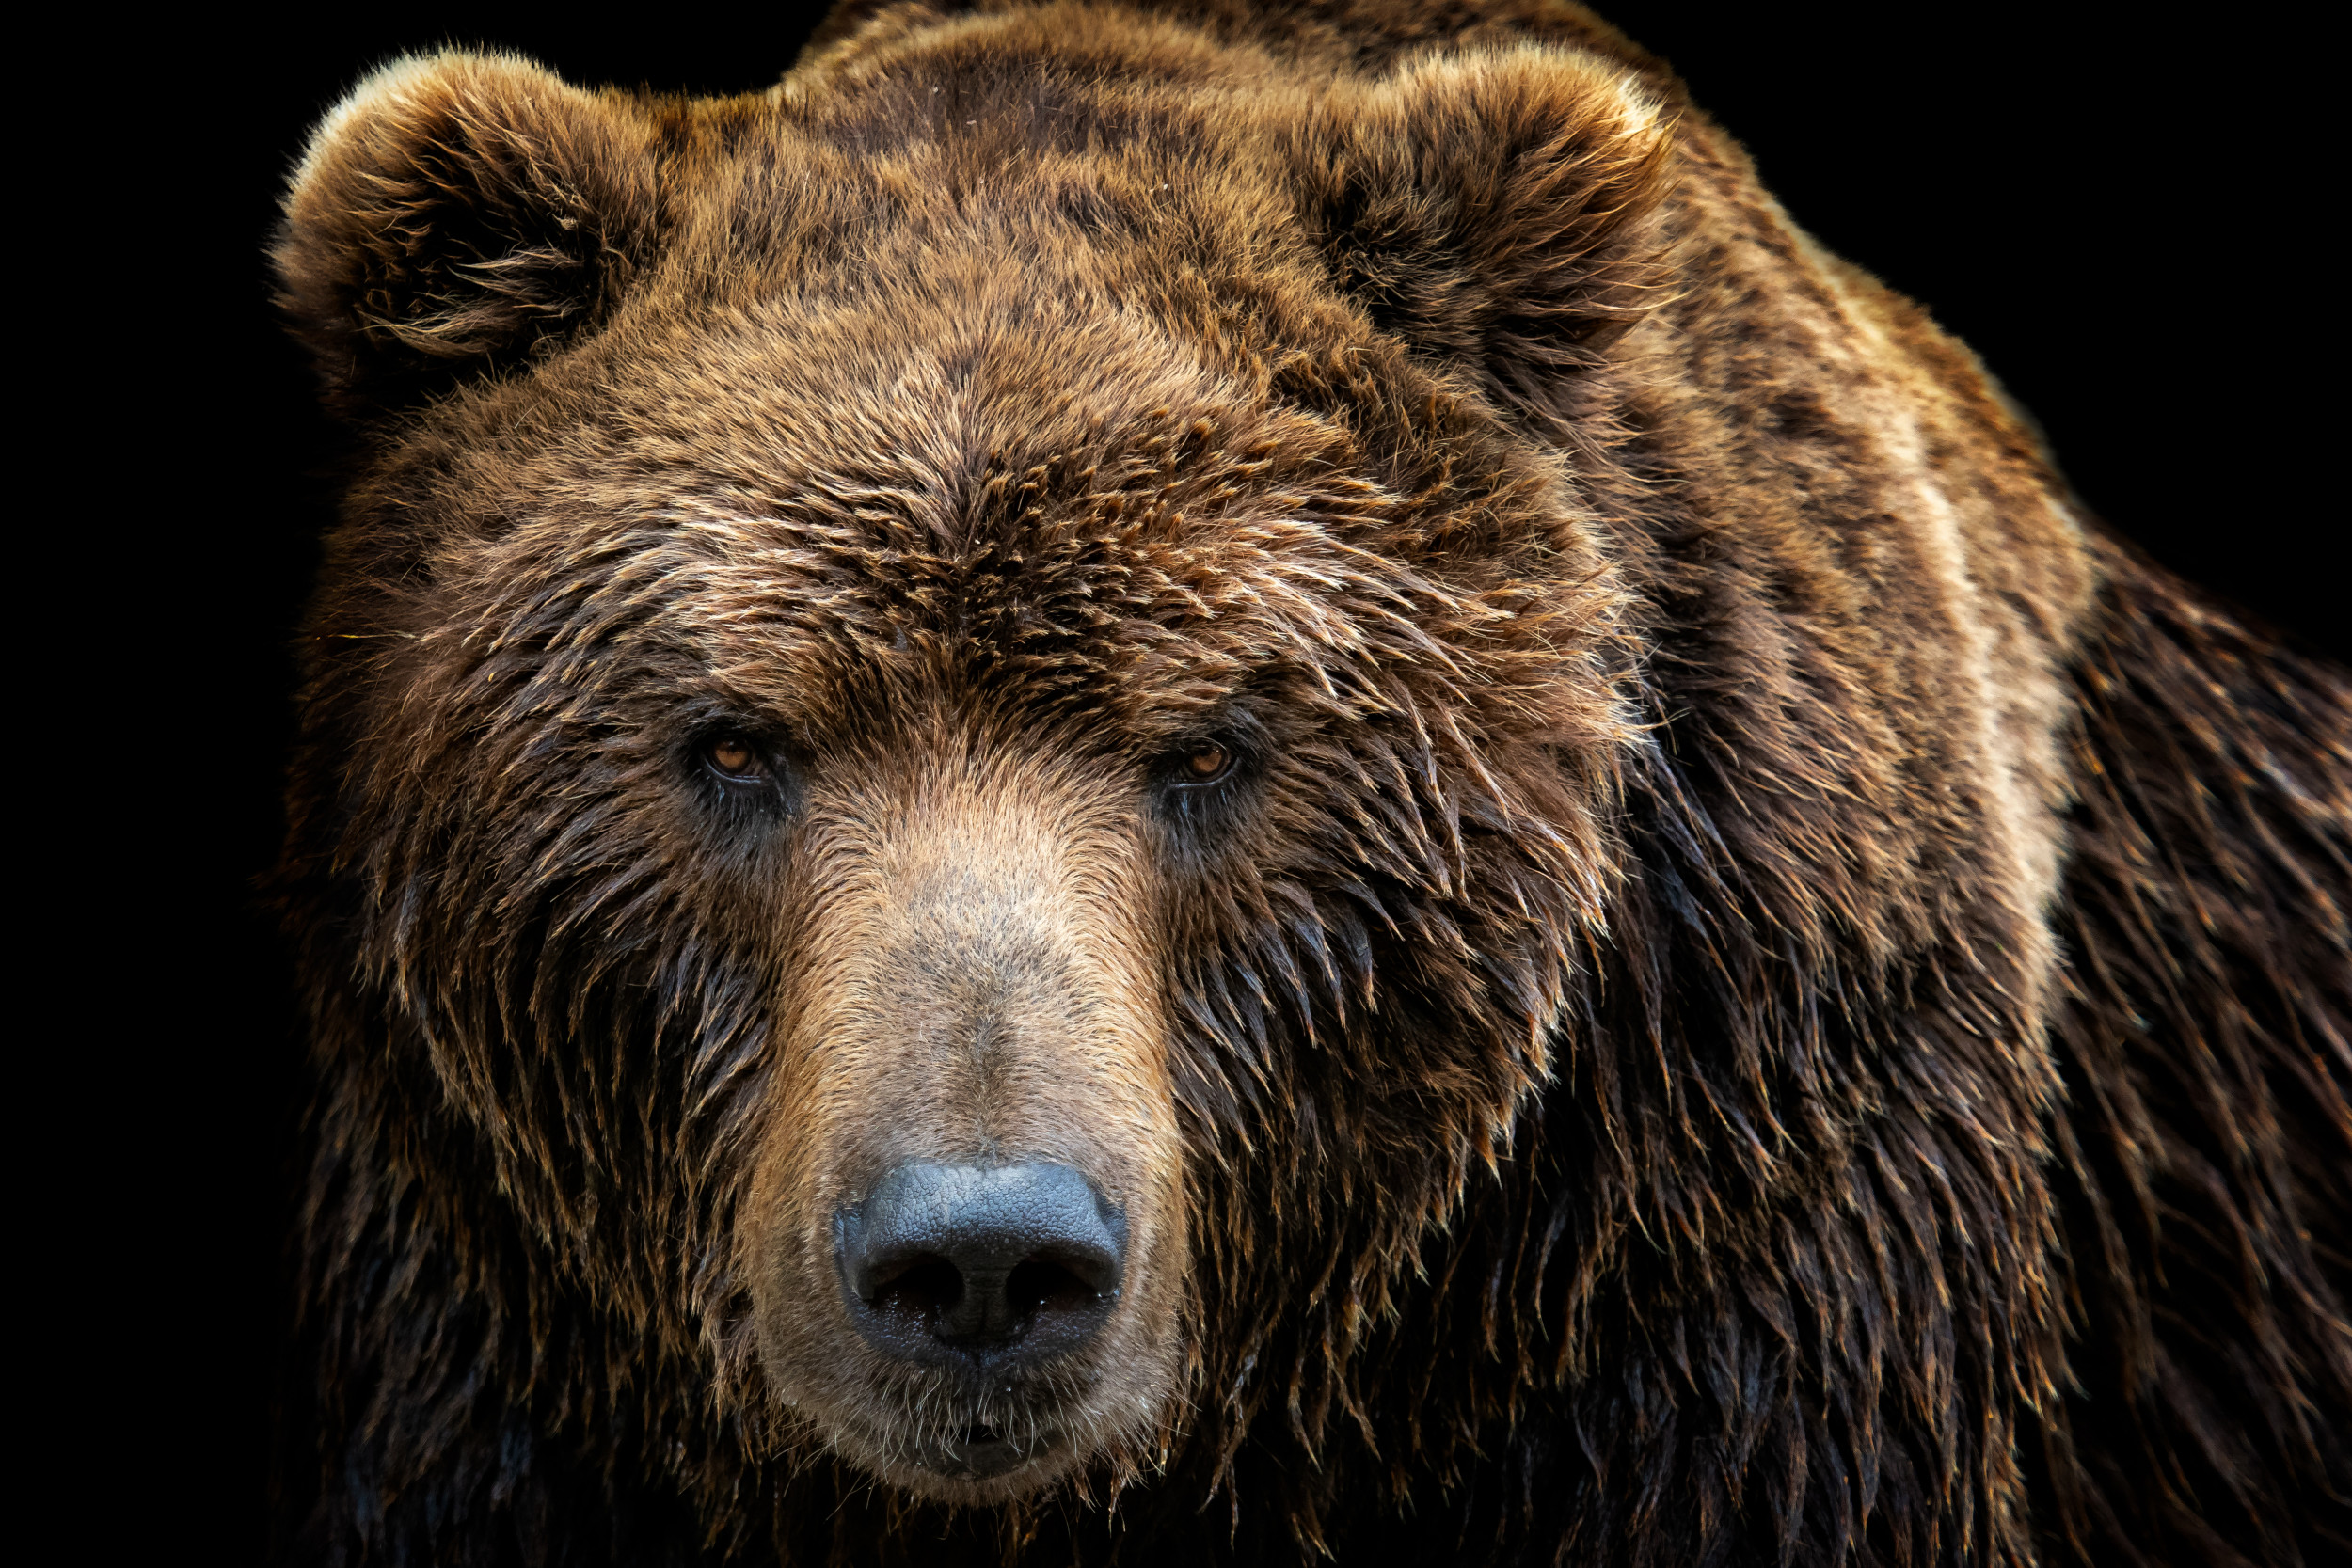 bear-attacks-sleeping-teen-in-utah-bites-his-face-these-are-the